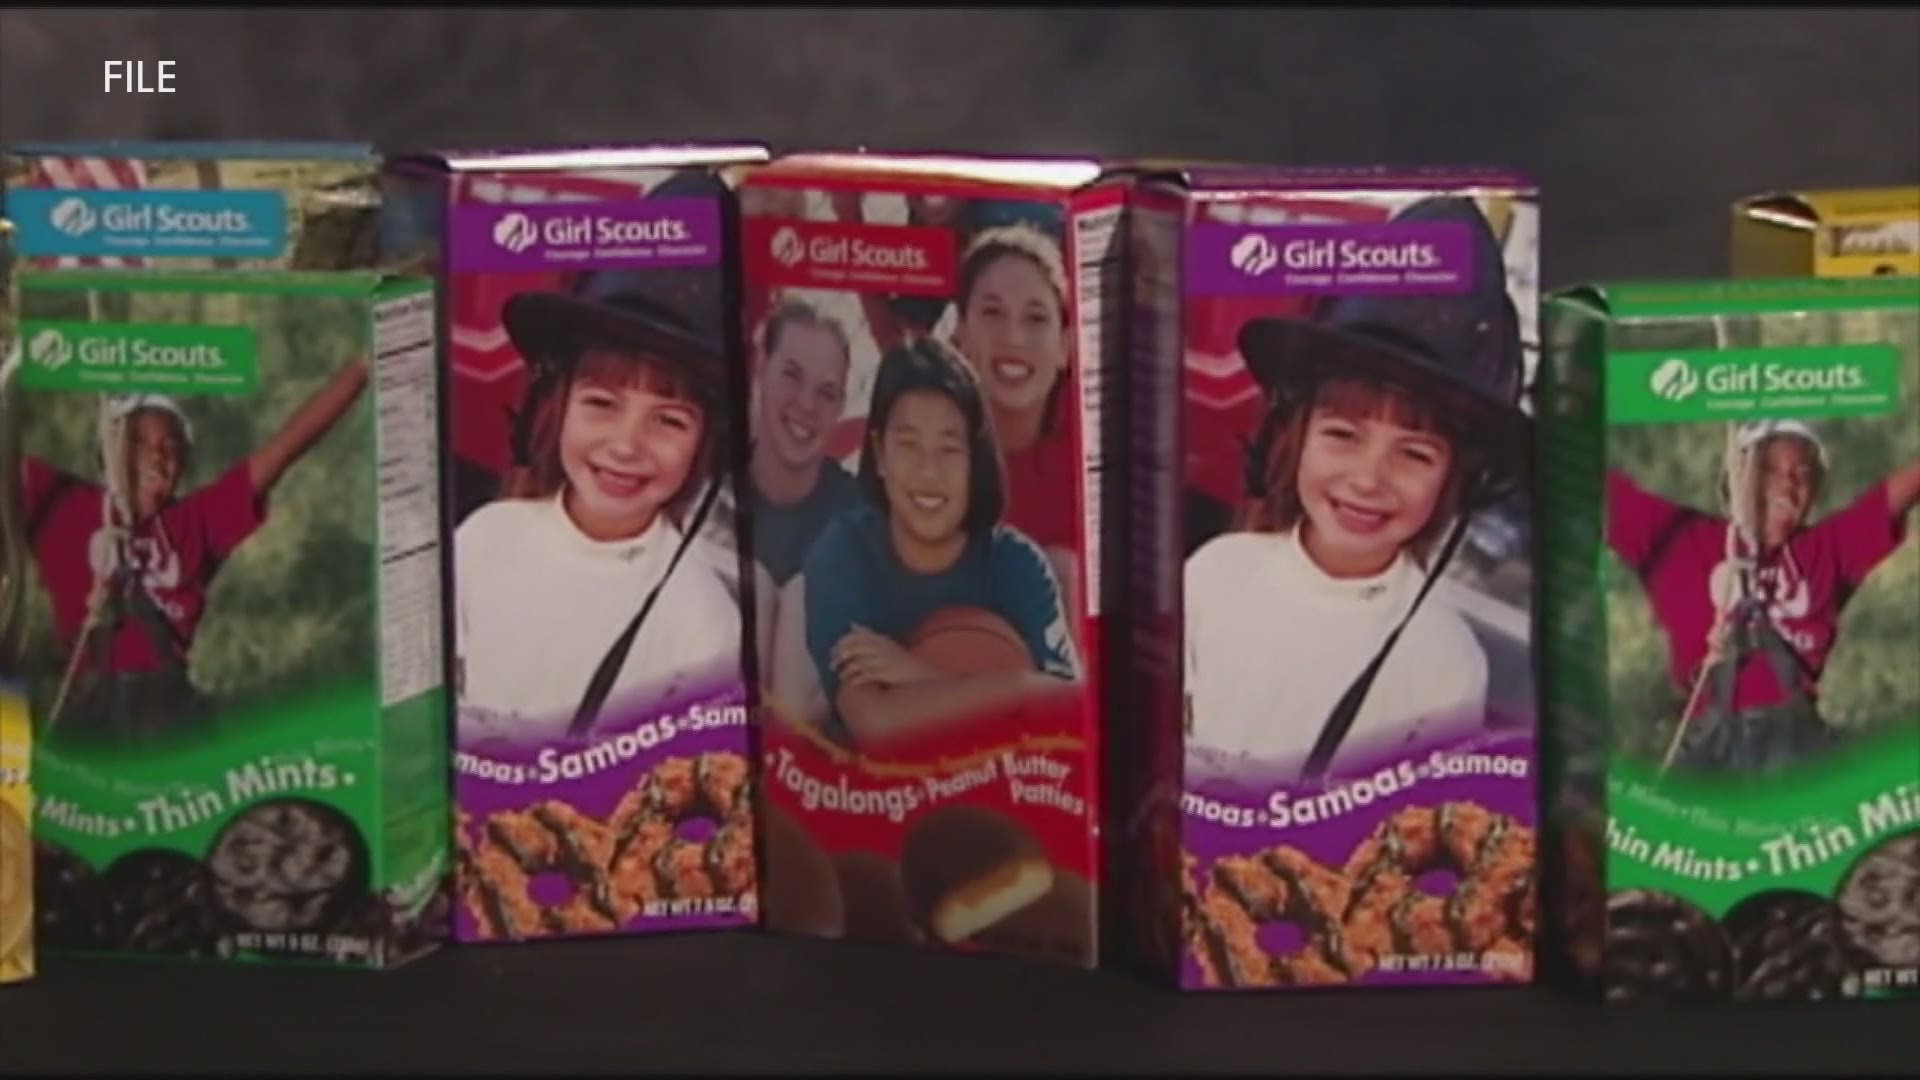 The Girl Scouts are pushing online sales this year. The cookies can then be handed out through contactless methods.